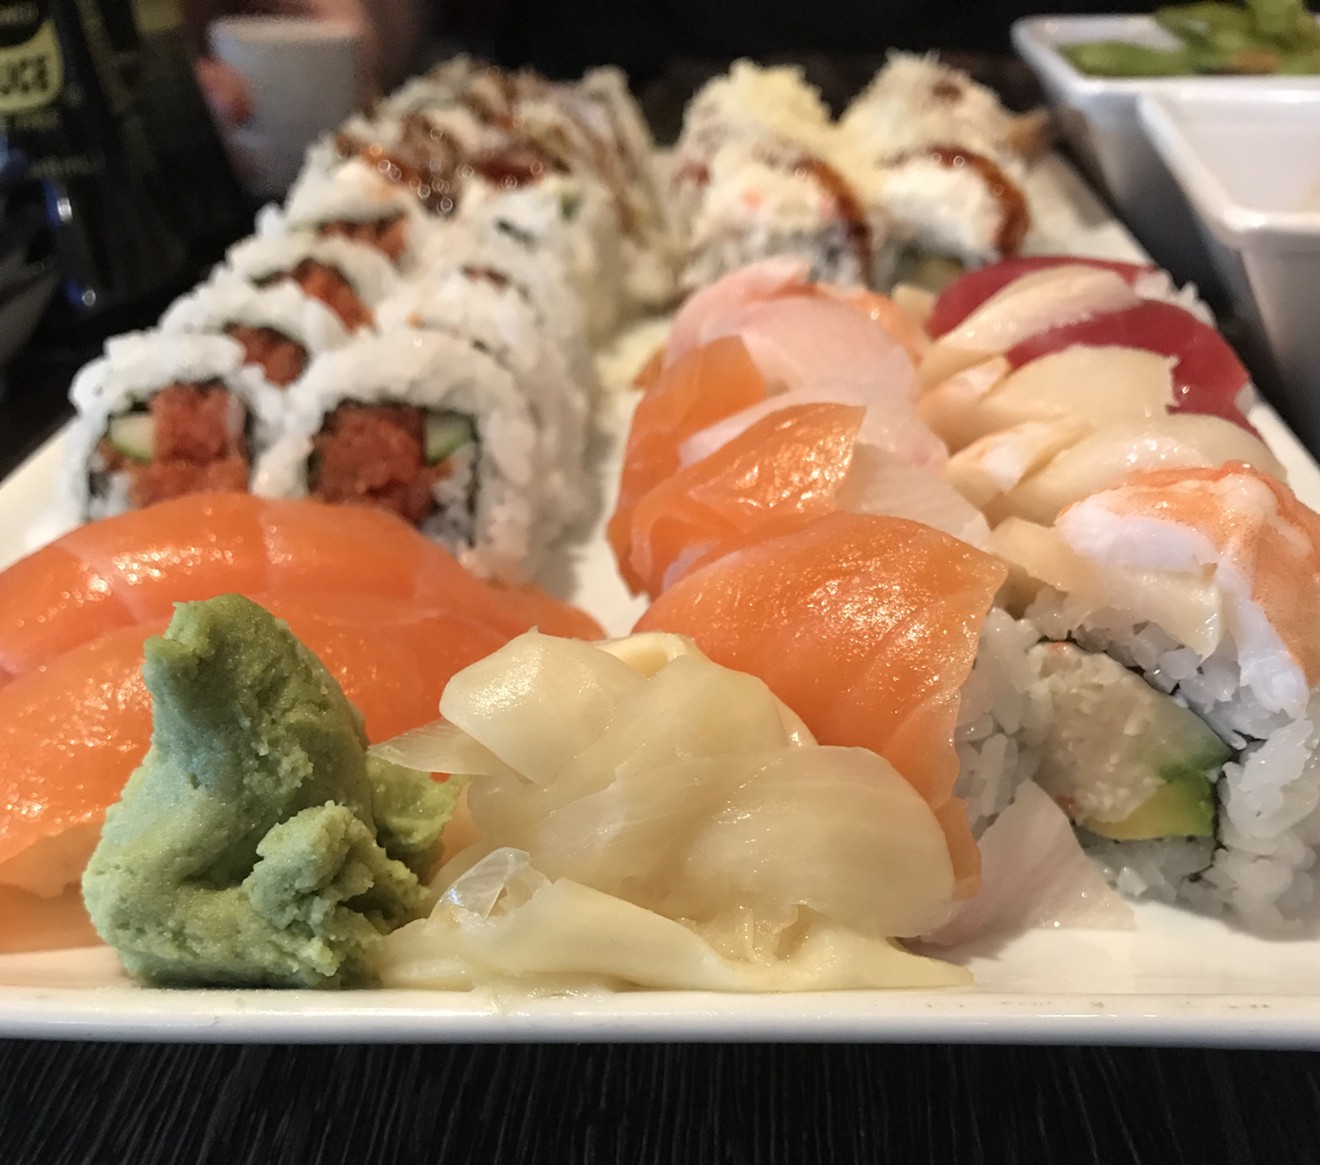 An assortment of fresh sushi from Sushiholic.